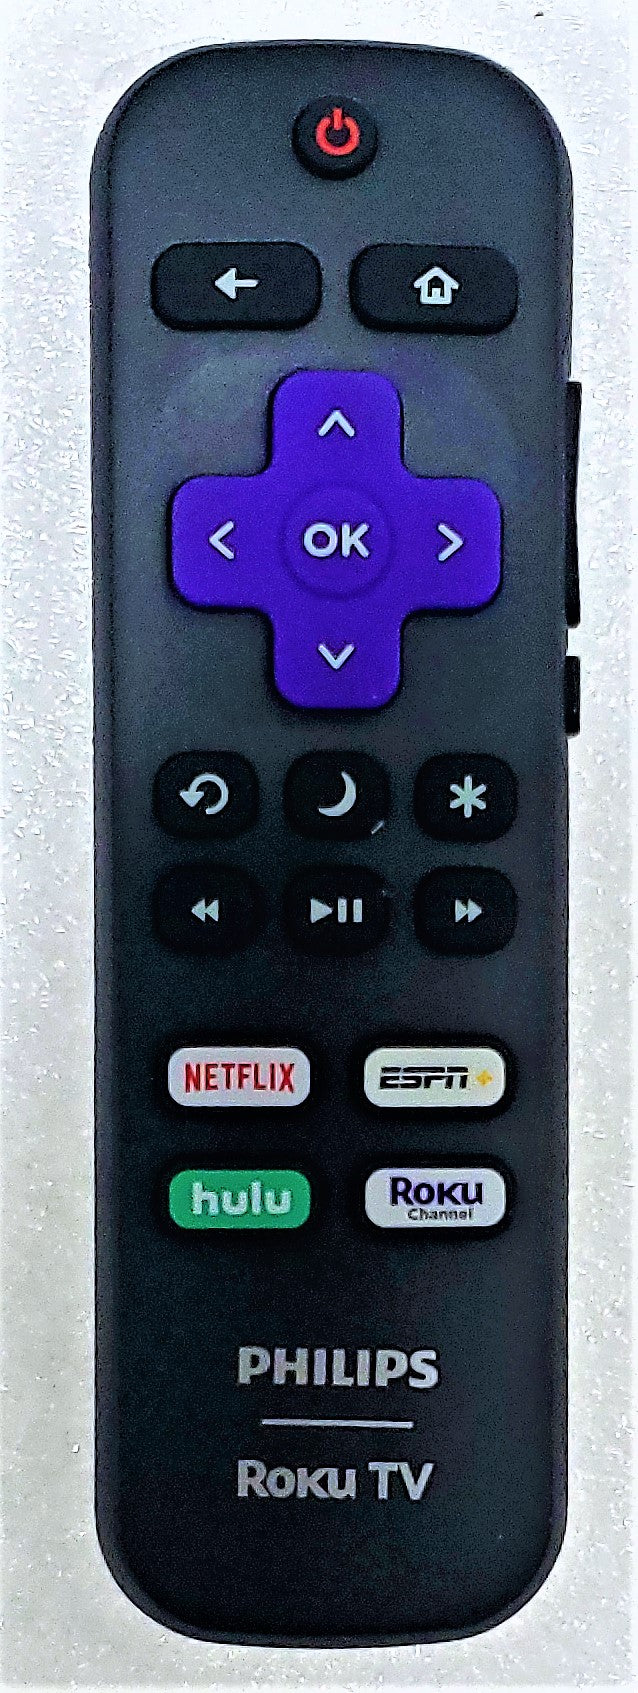 OEM replacement remote control for Philips Roku TV URMT21CND010